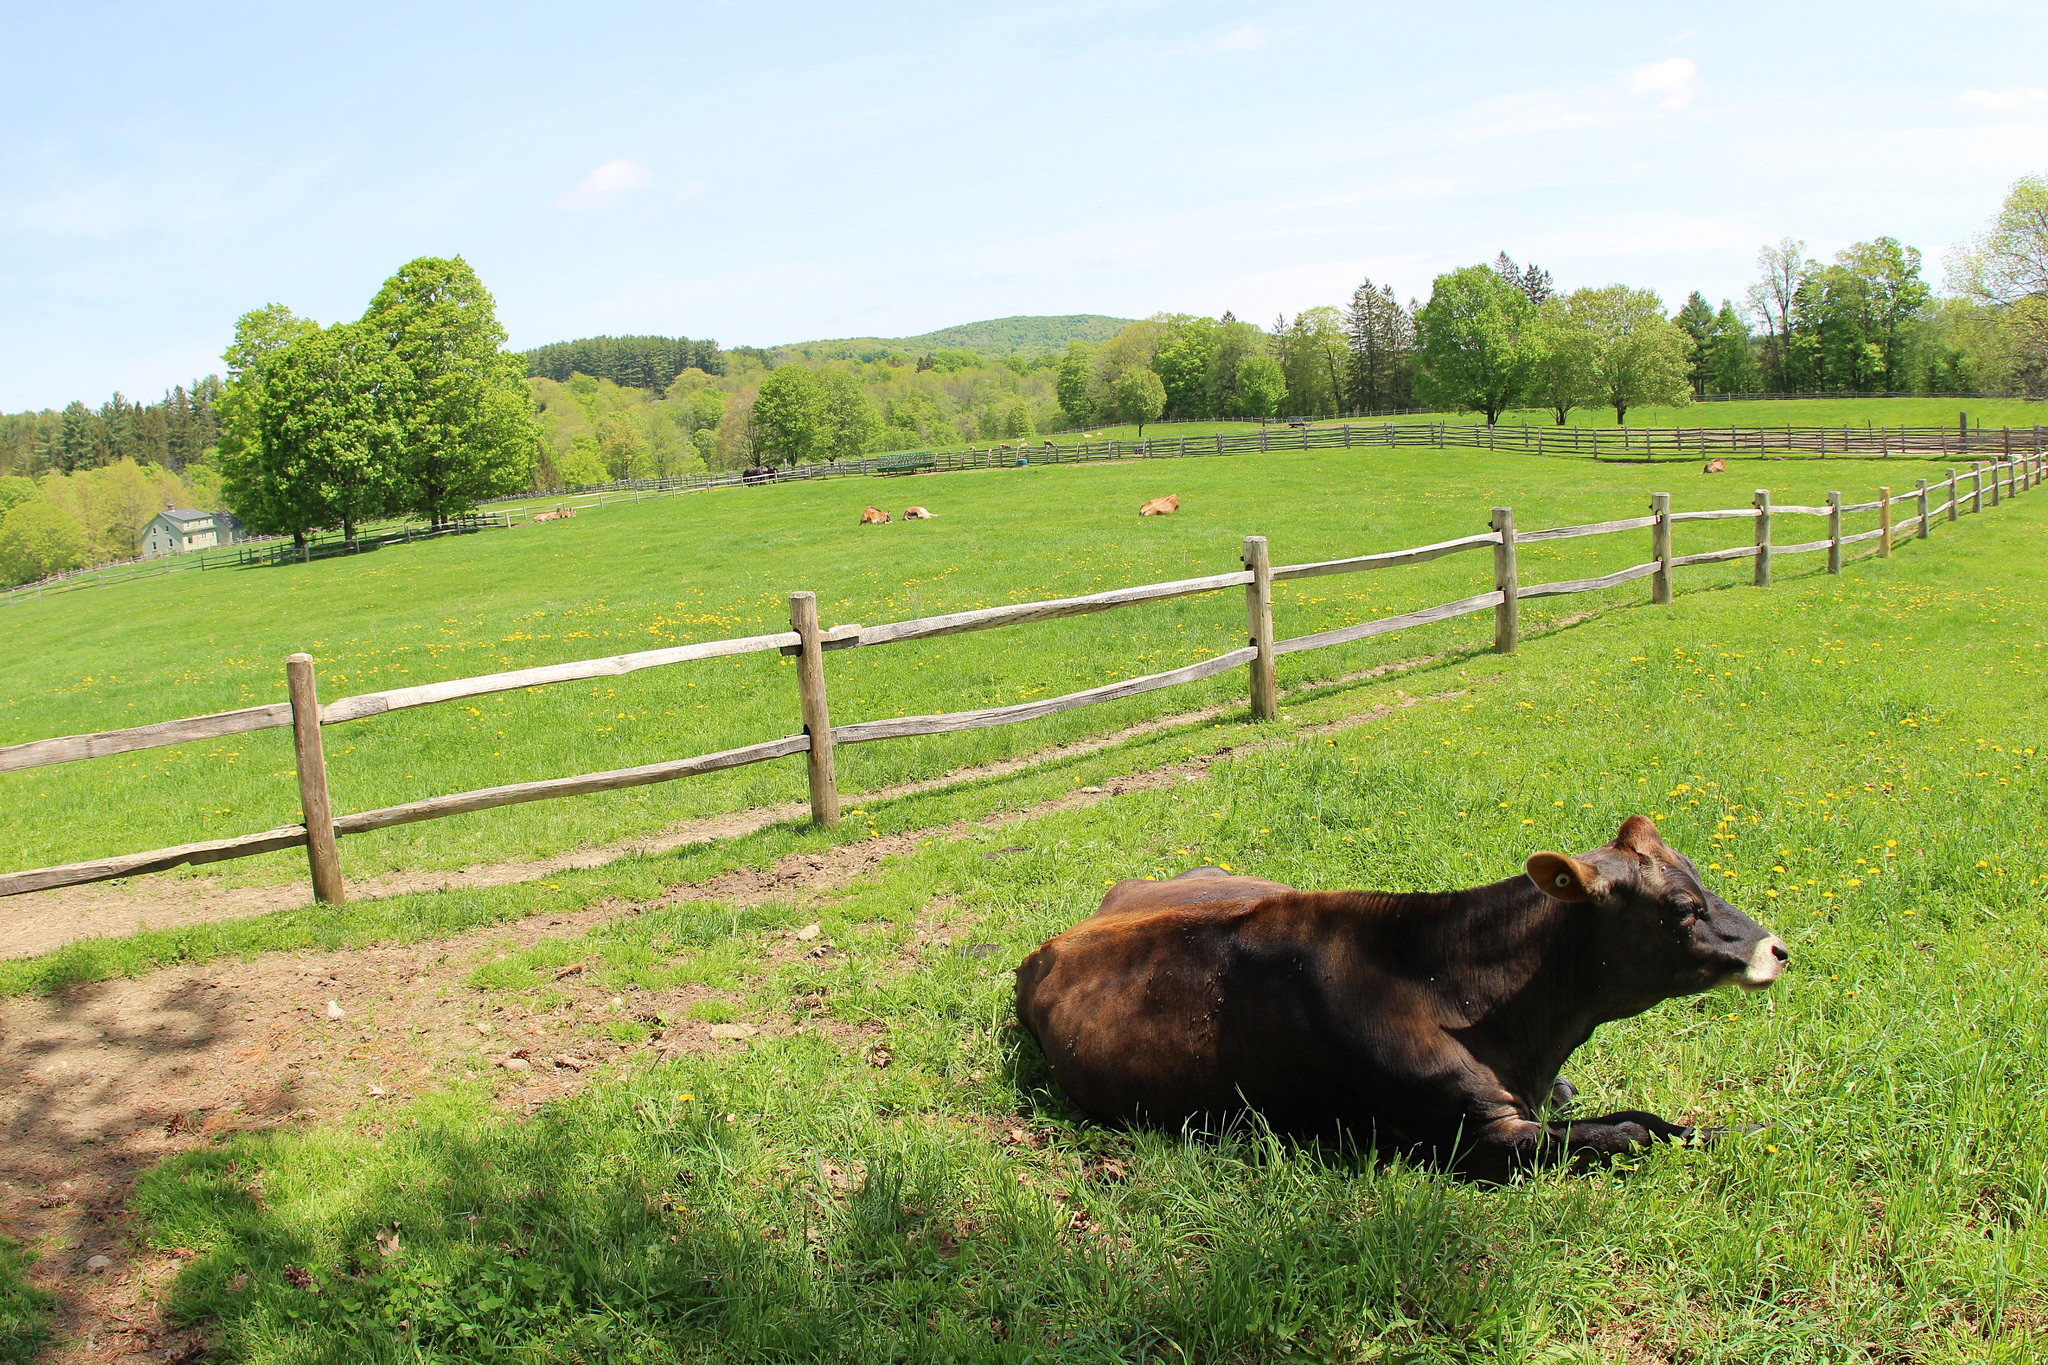 Billings Farm & Museum in Woodstock, Vermont is a perfect first-time New England destination.